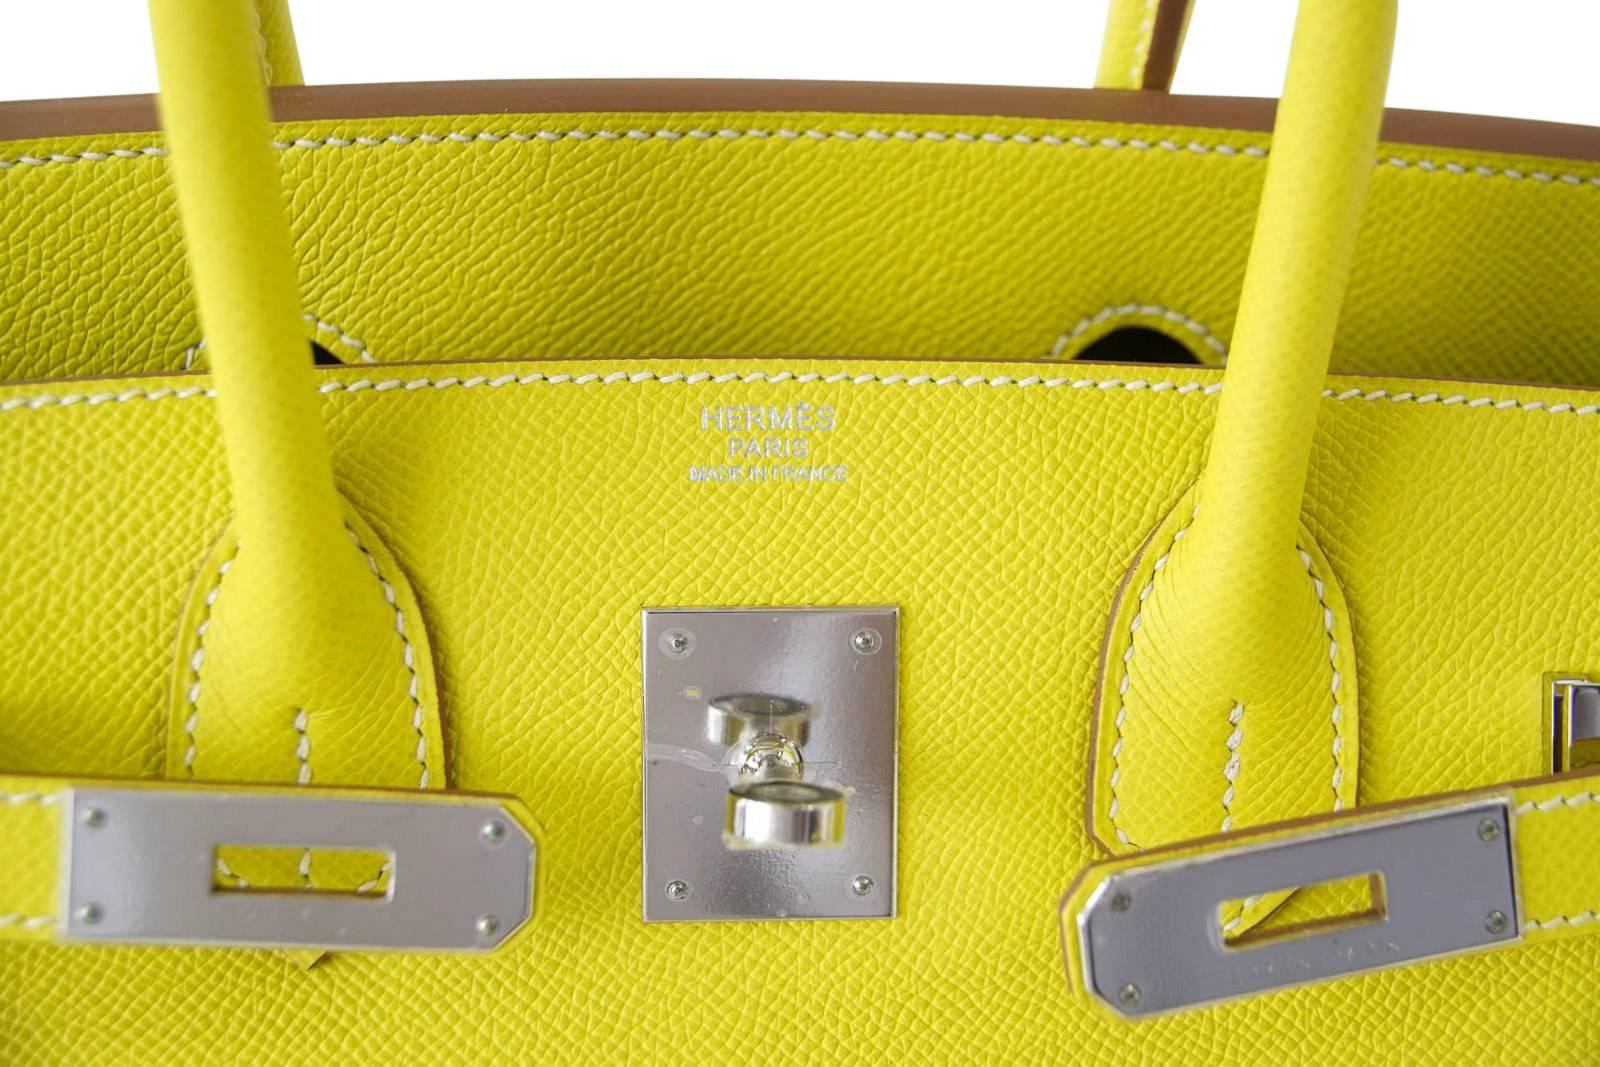 Guaranteed authentic exquisite Hermes 30 Birkin bag rare Limited Edition Lime Candy with Gris Perle interior.  
Fresh with Palladium hardware and Epsom leather.
NEW or NEVER WORN
Comes with the lock and keys in the clochette, sleepers, raincoat